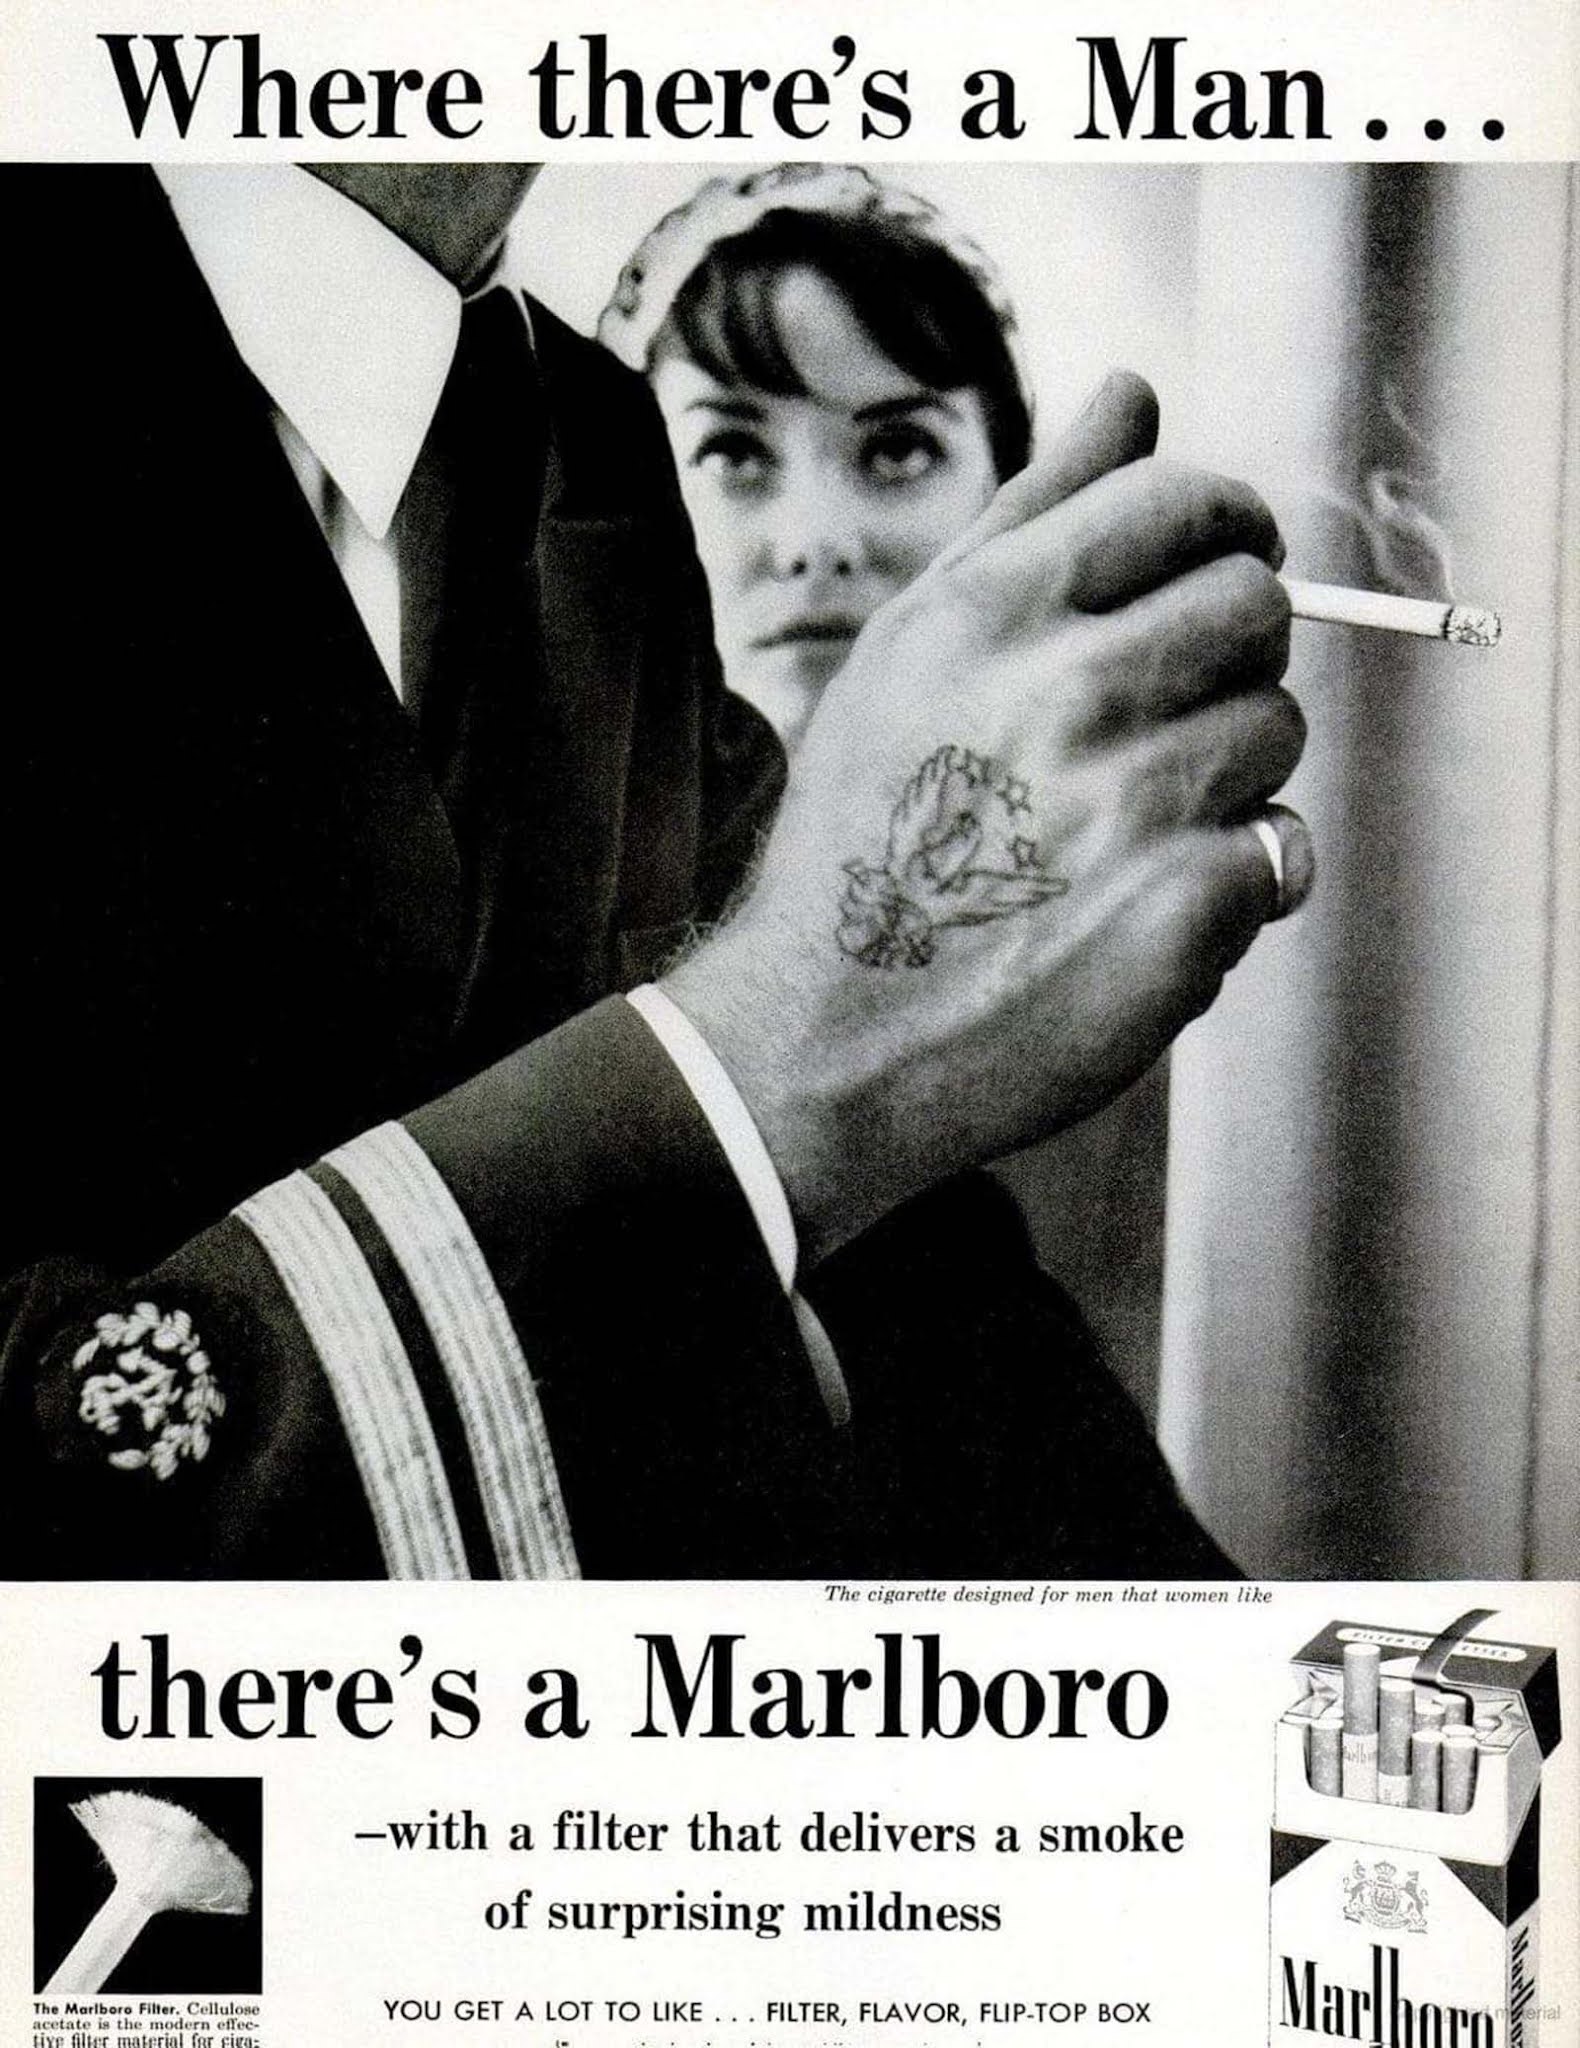 vintage sexist offensive ads